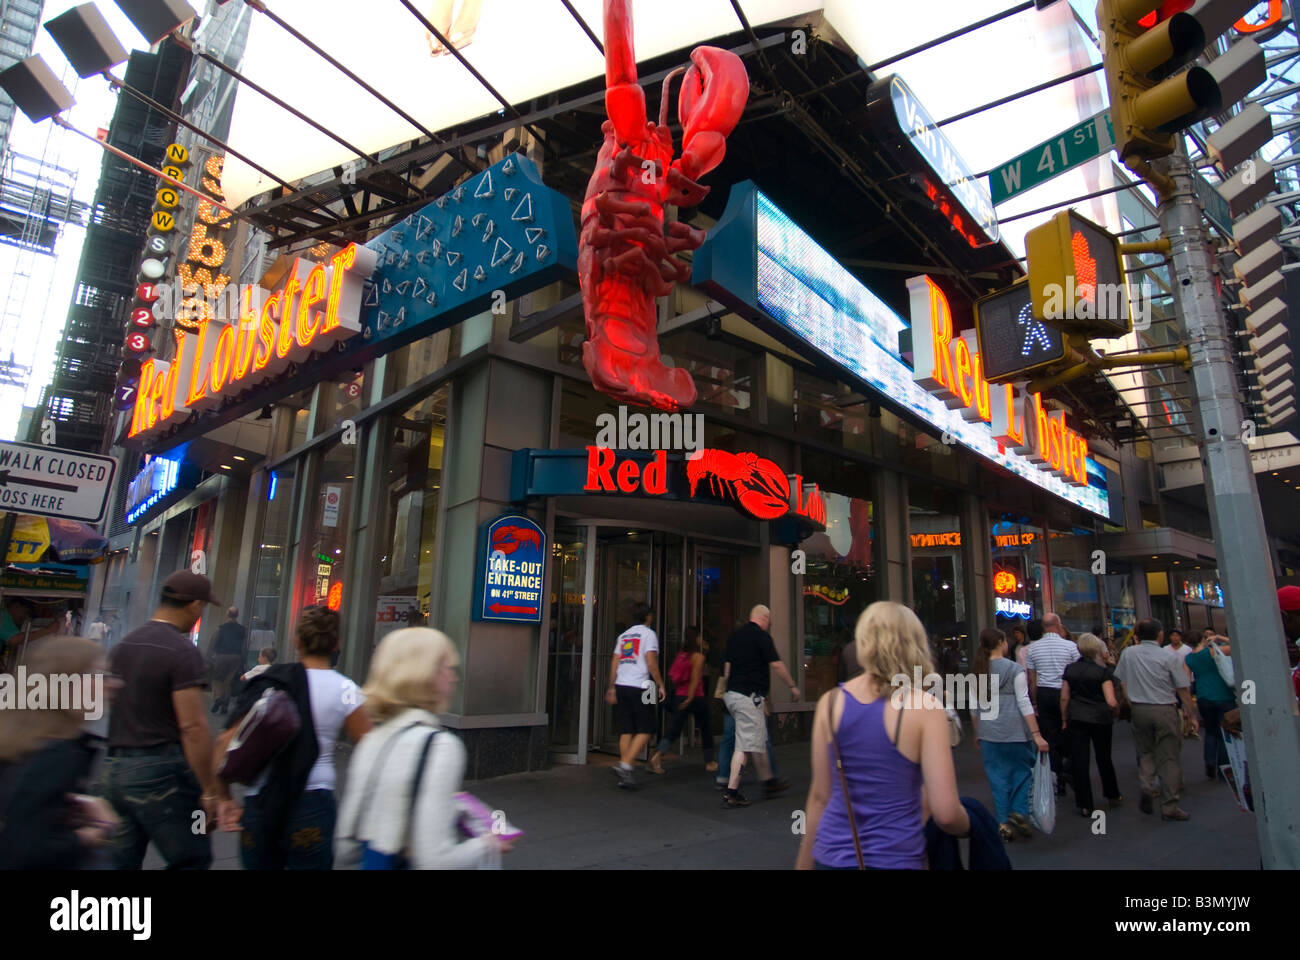 A Times Square branch of the Red Lobster restaurant chain Stock Photo